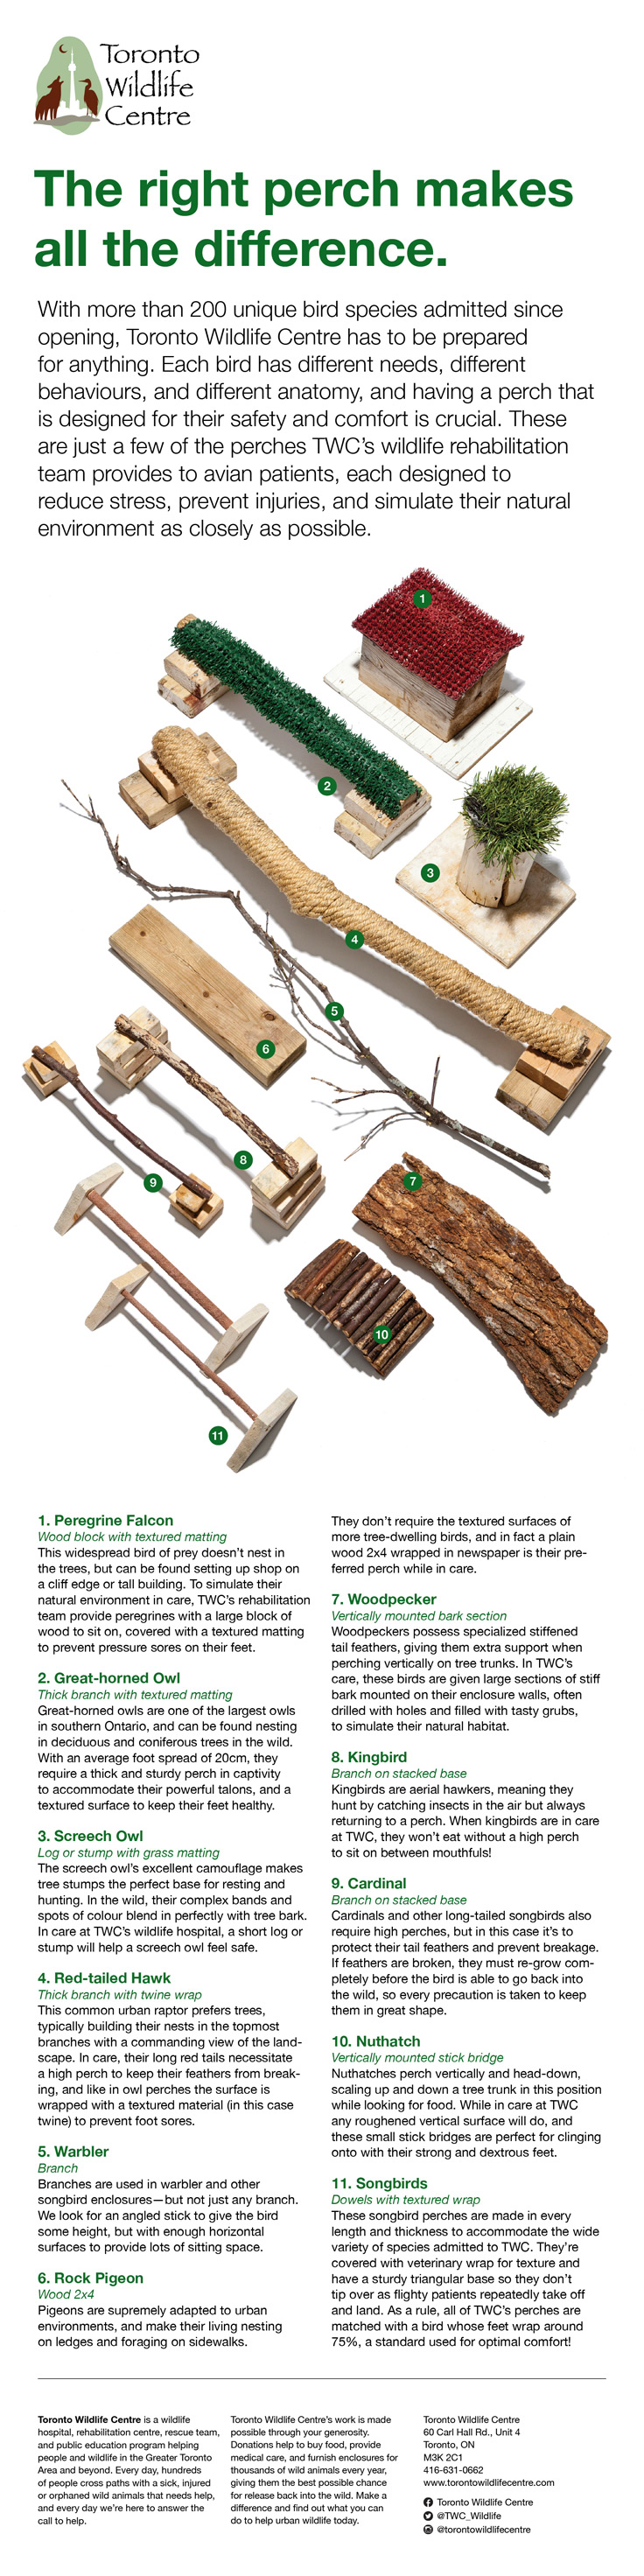 Perches Infographic